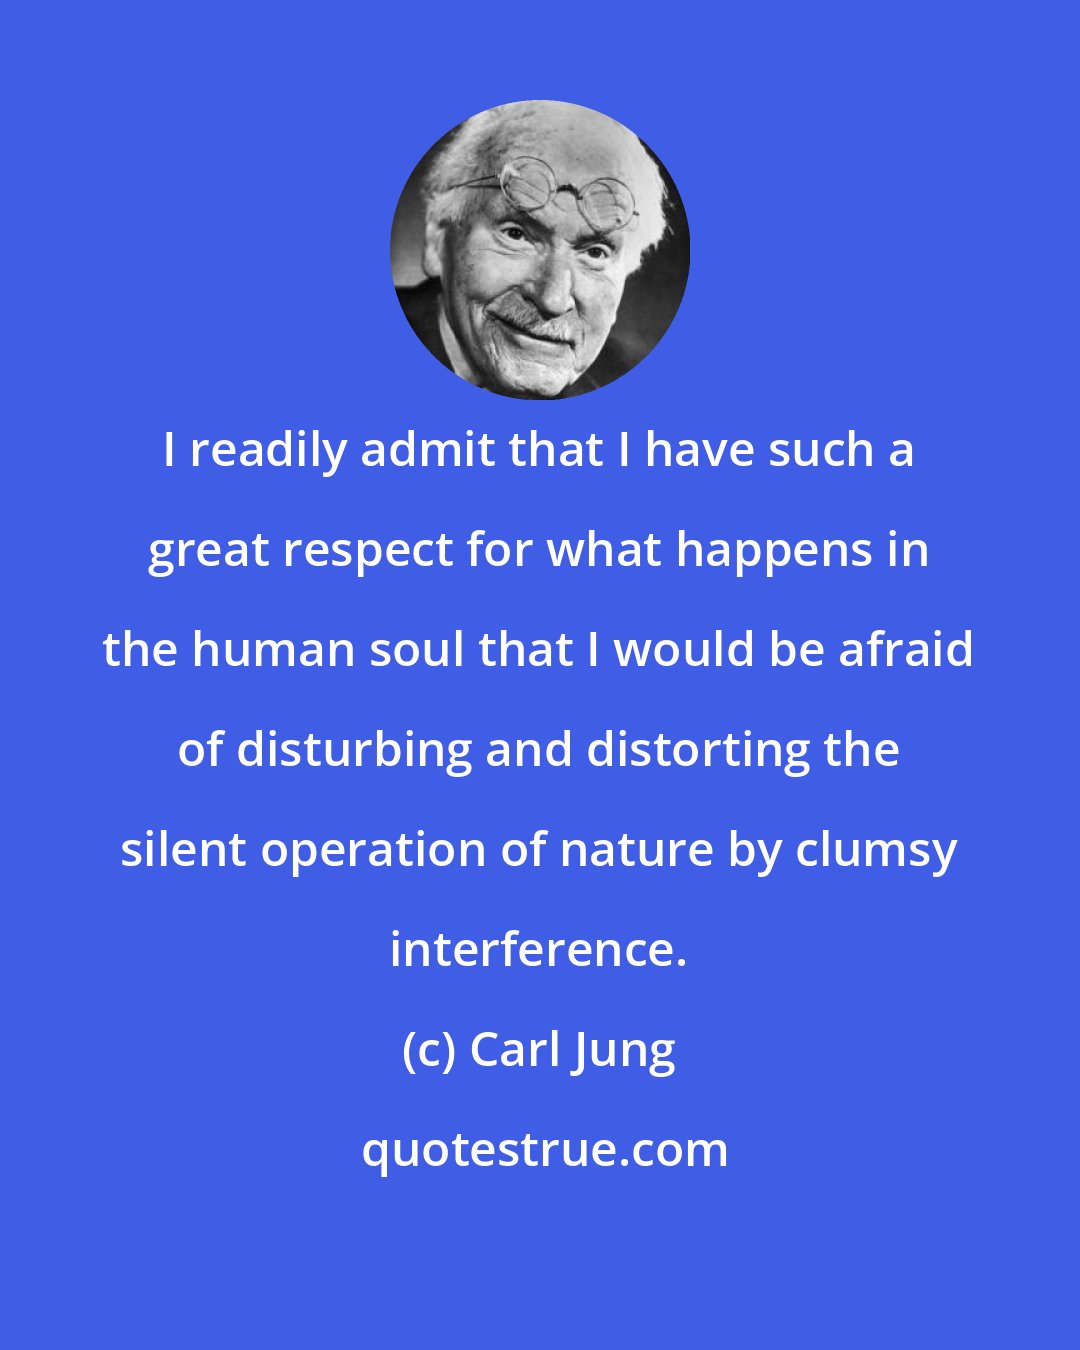 Carl Jung: I readily admit that I have such a great respect for what happens in the human soul that I would be afraid of disturbing and distorting the silent operation of nature by clumsy interference.